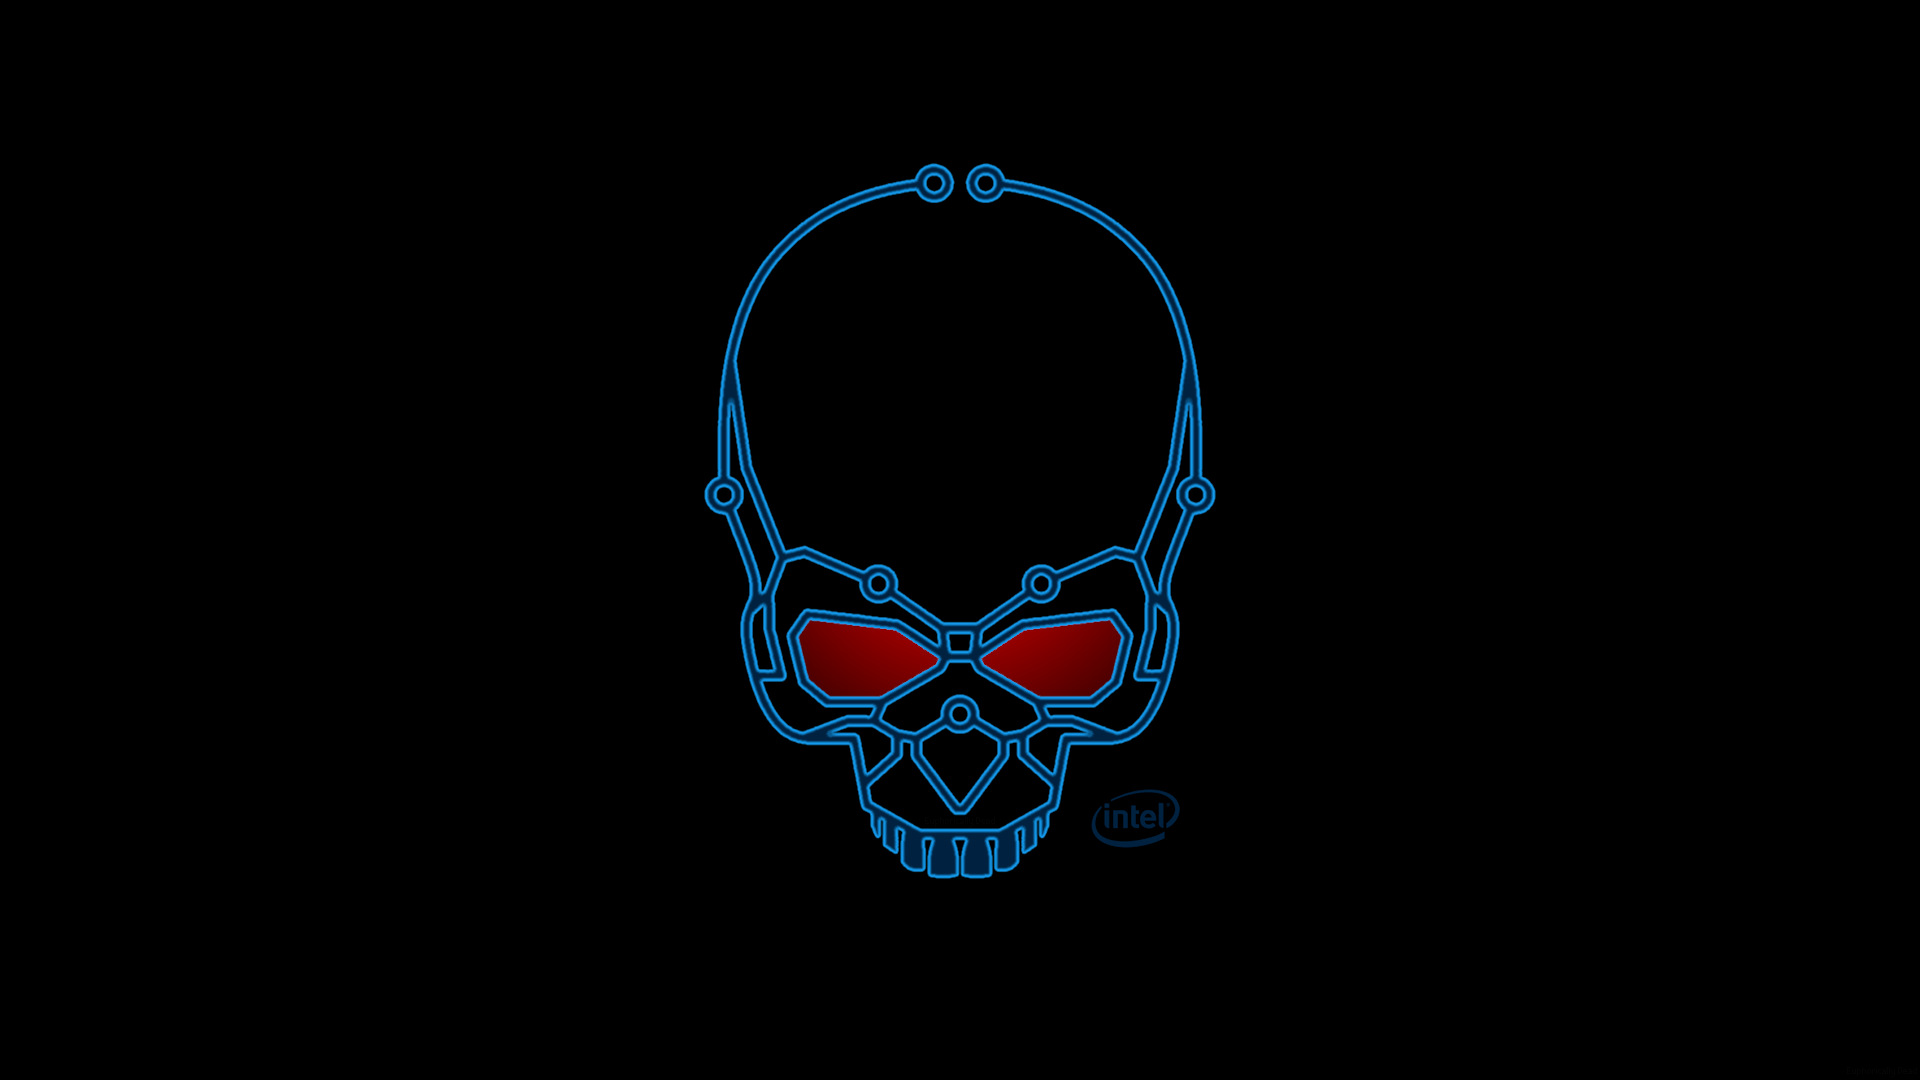 Free download Intel Skull Wallpaper 1080 by euphoricallydead on [1920x1080] for your Desktop, Mobile & Tablet. Explore Intel Wallpaper. Intel Extreme Wallpaper, Intel Security Wallpaper, Intel Core Wallpaper